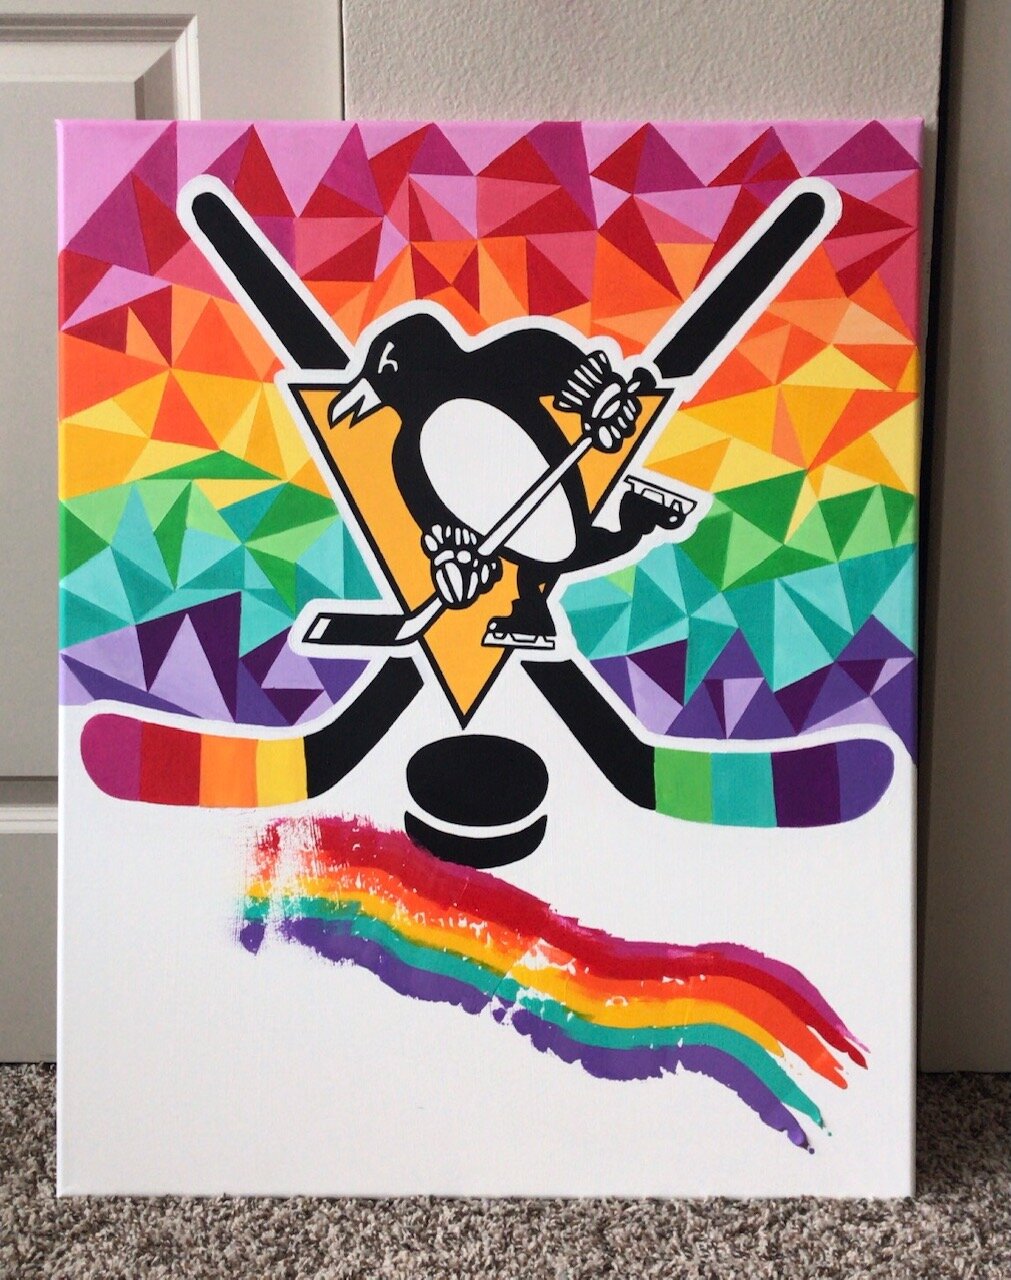 Pittsburgh Penguins by Wishum Gregory – The Black Art Depot